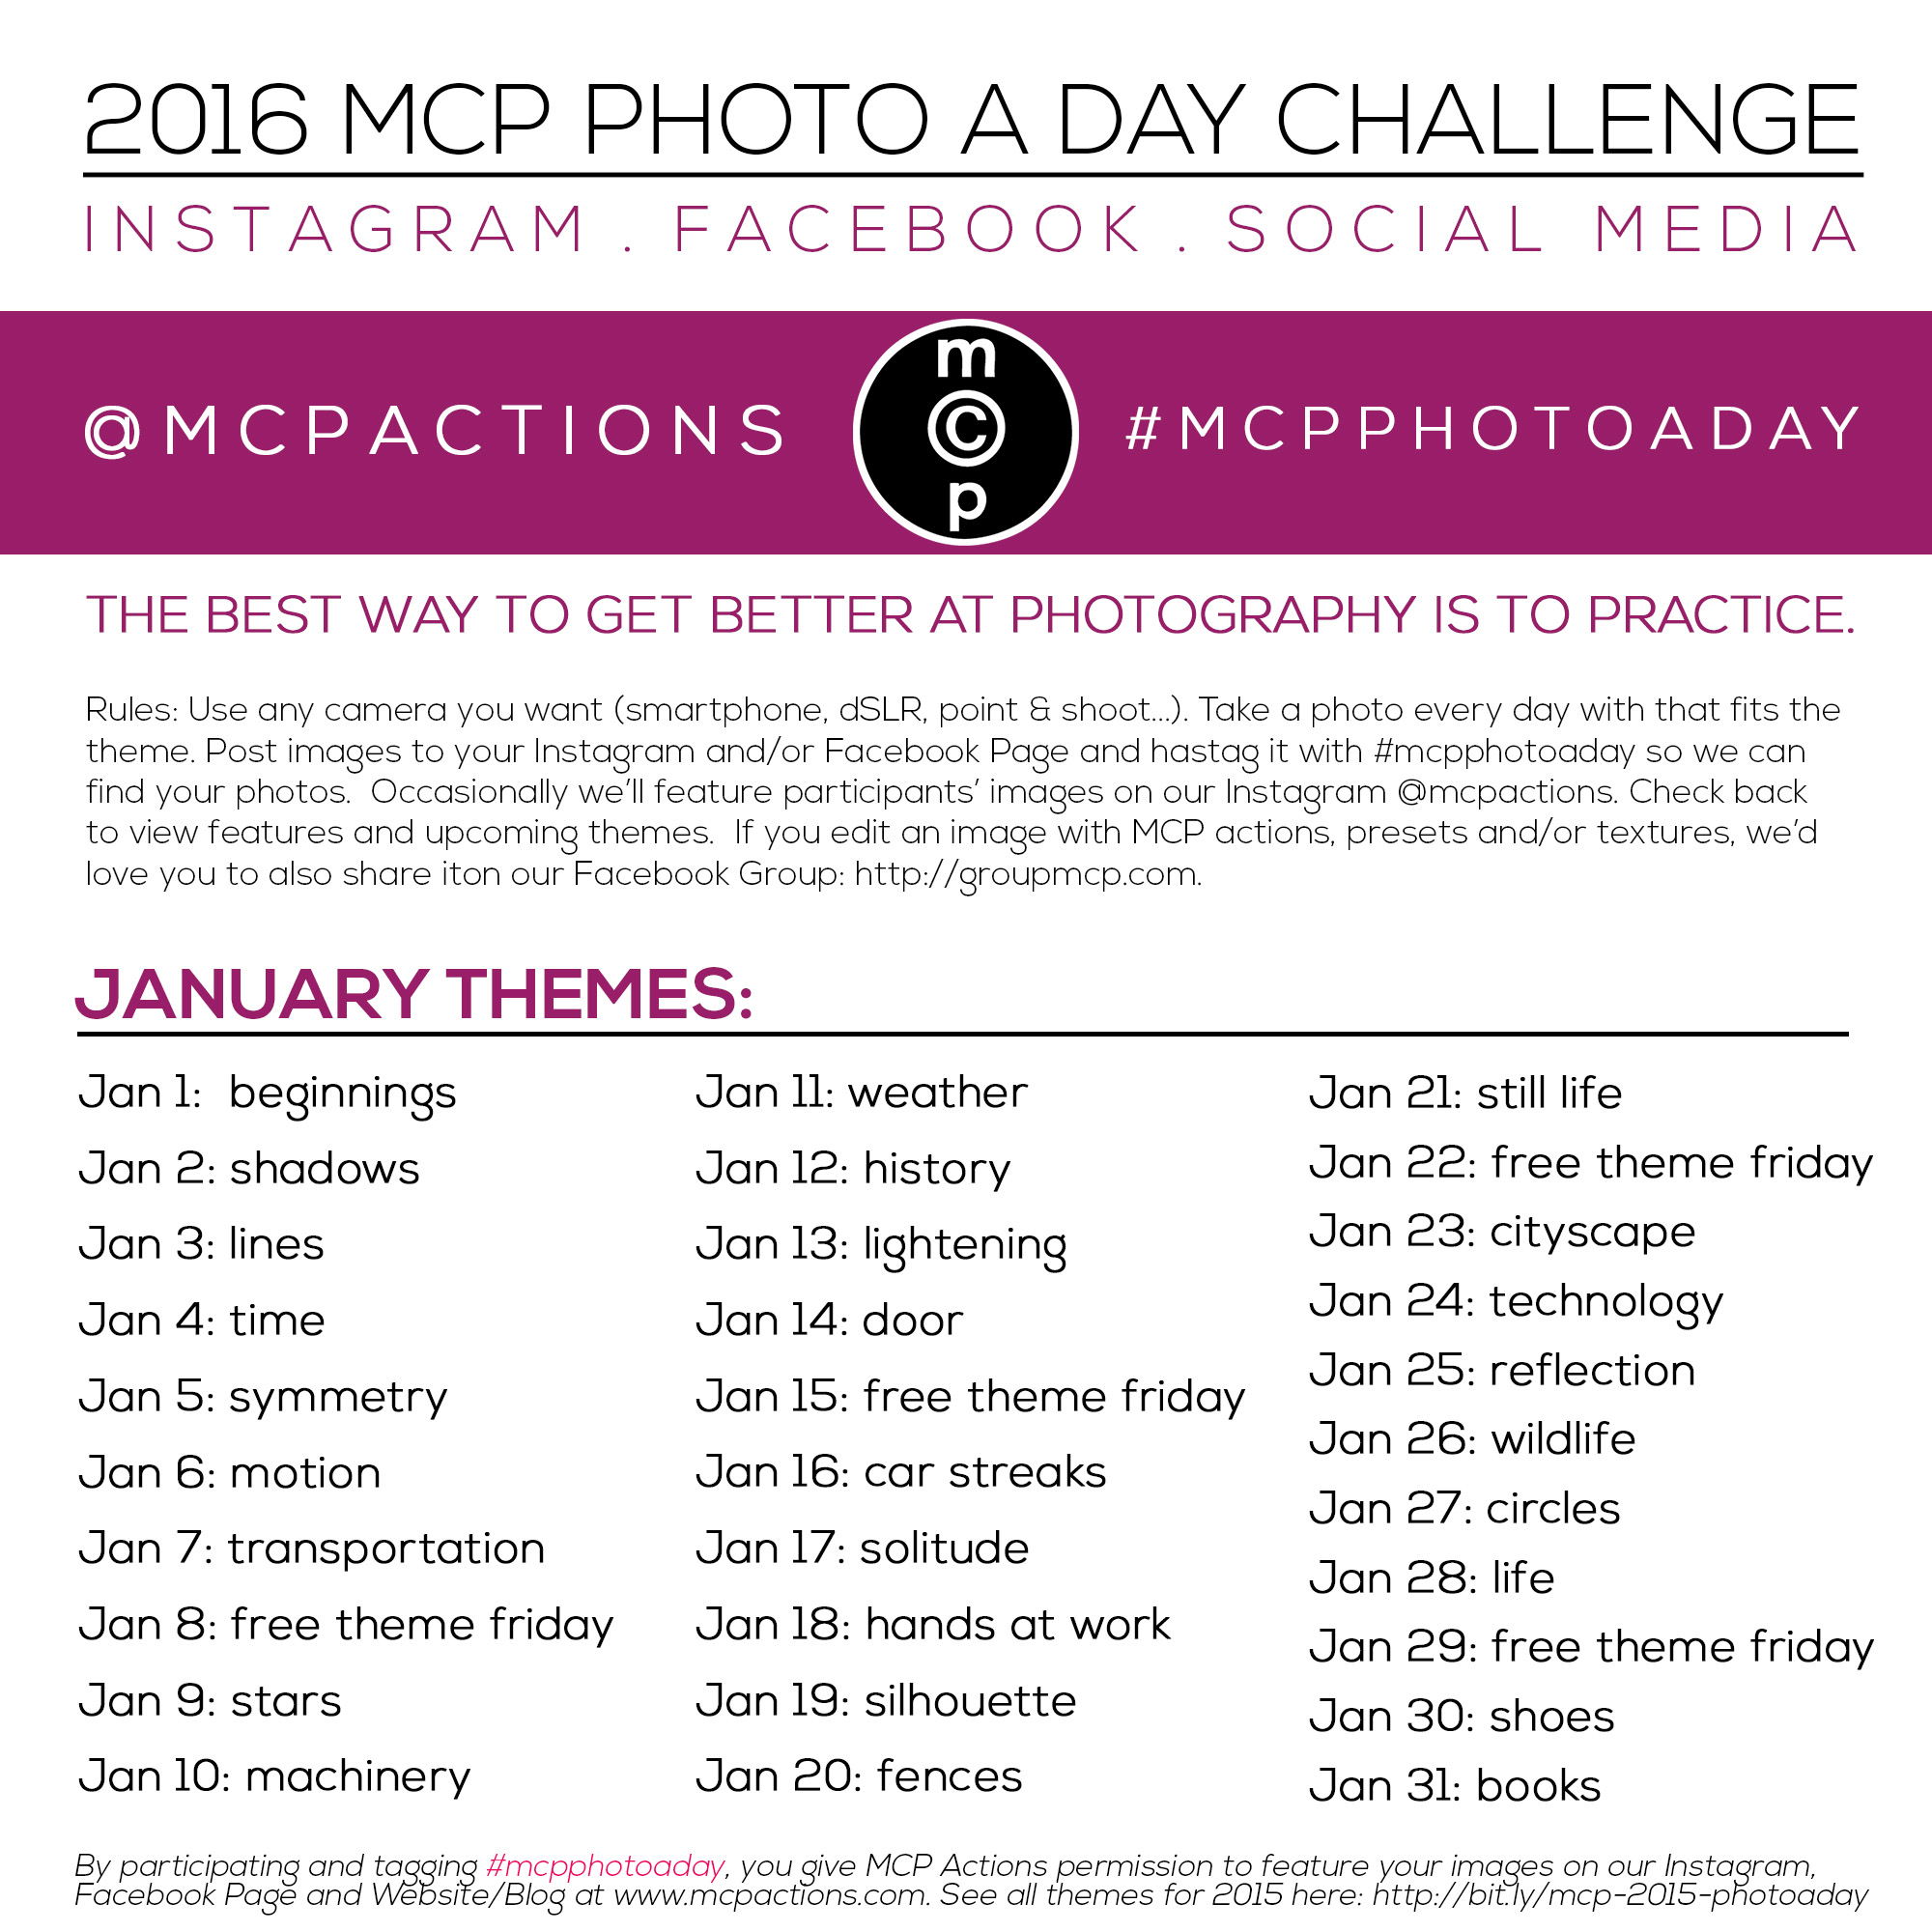 mcpphotoaday-janvier-2016-rempli MCP Photo A Day Challenge for 2016 Activités Tâches MCP Actions Projets